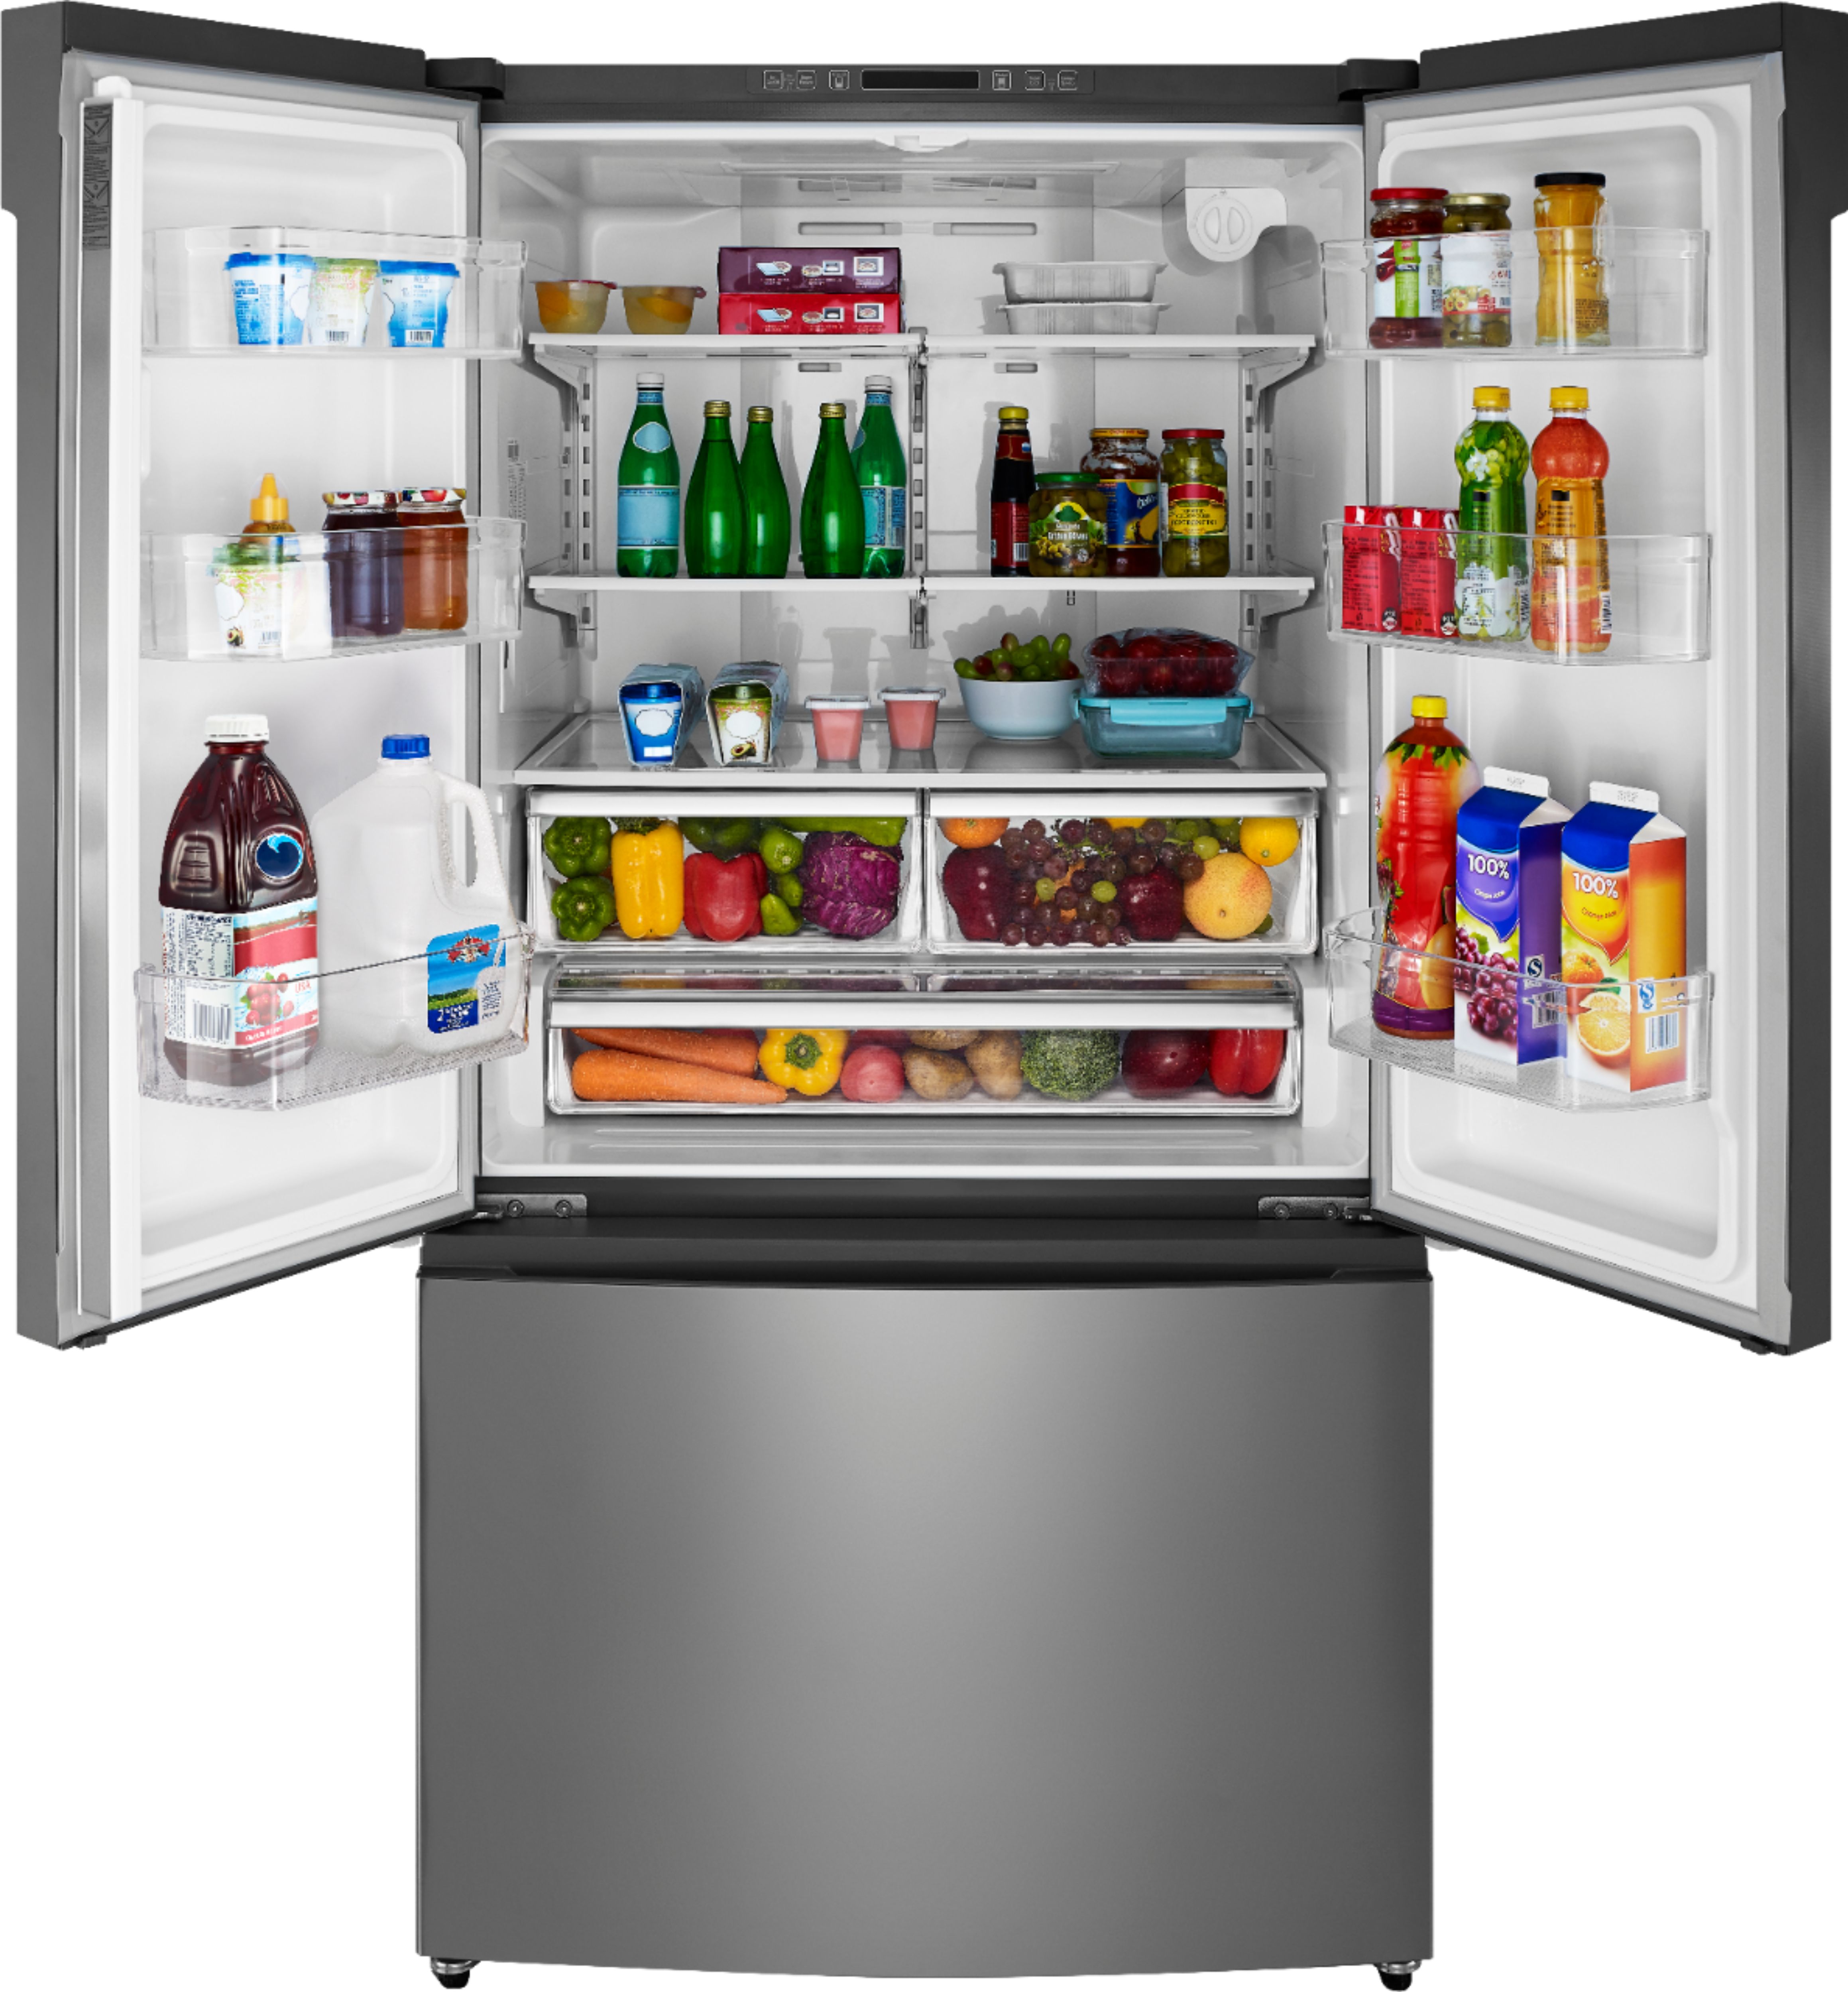 28+ Insignia refrigerator not cooling ideas